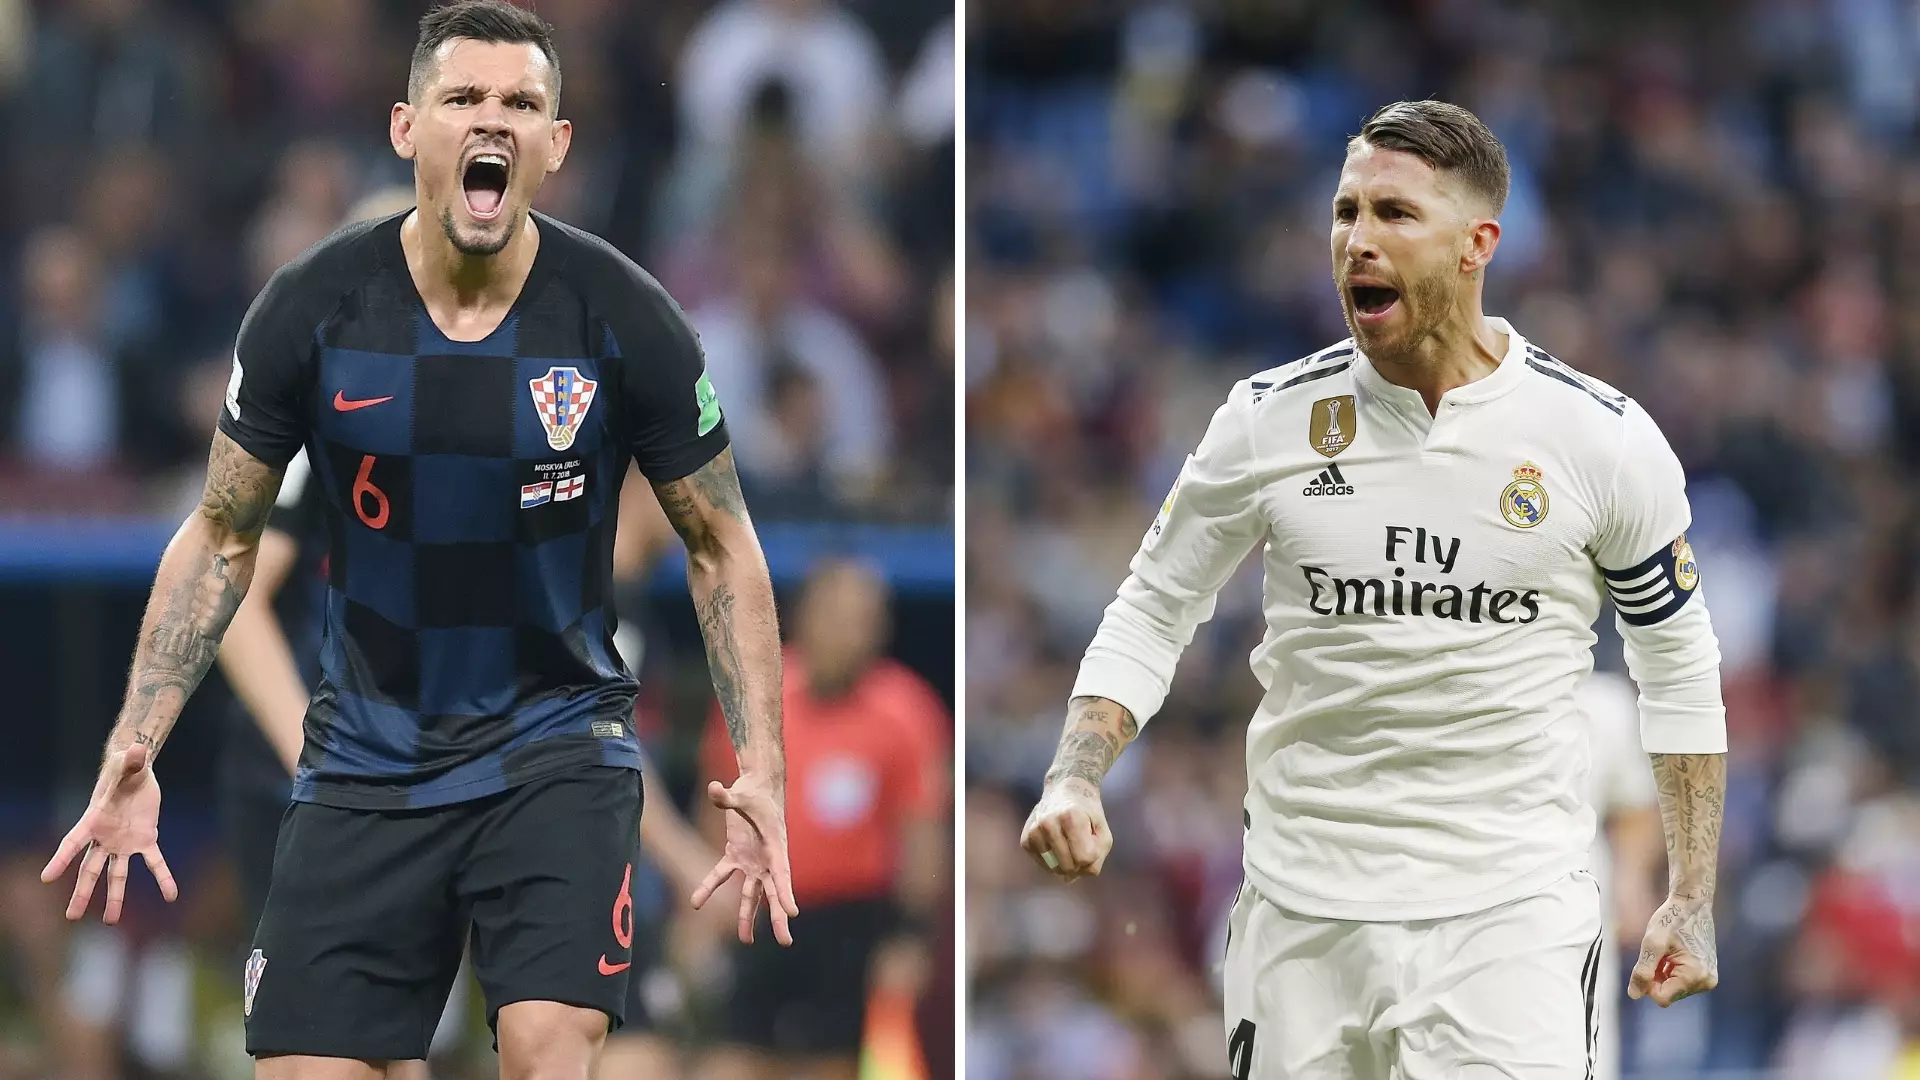 Lovren Calls Ramos Out For Making More Mistakes Than Him, Madrid Captain Now Responds